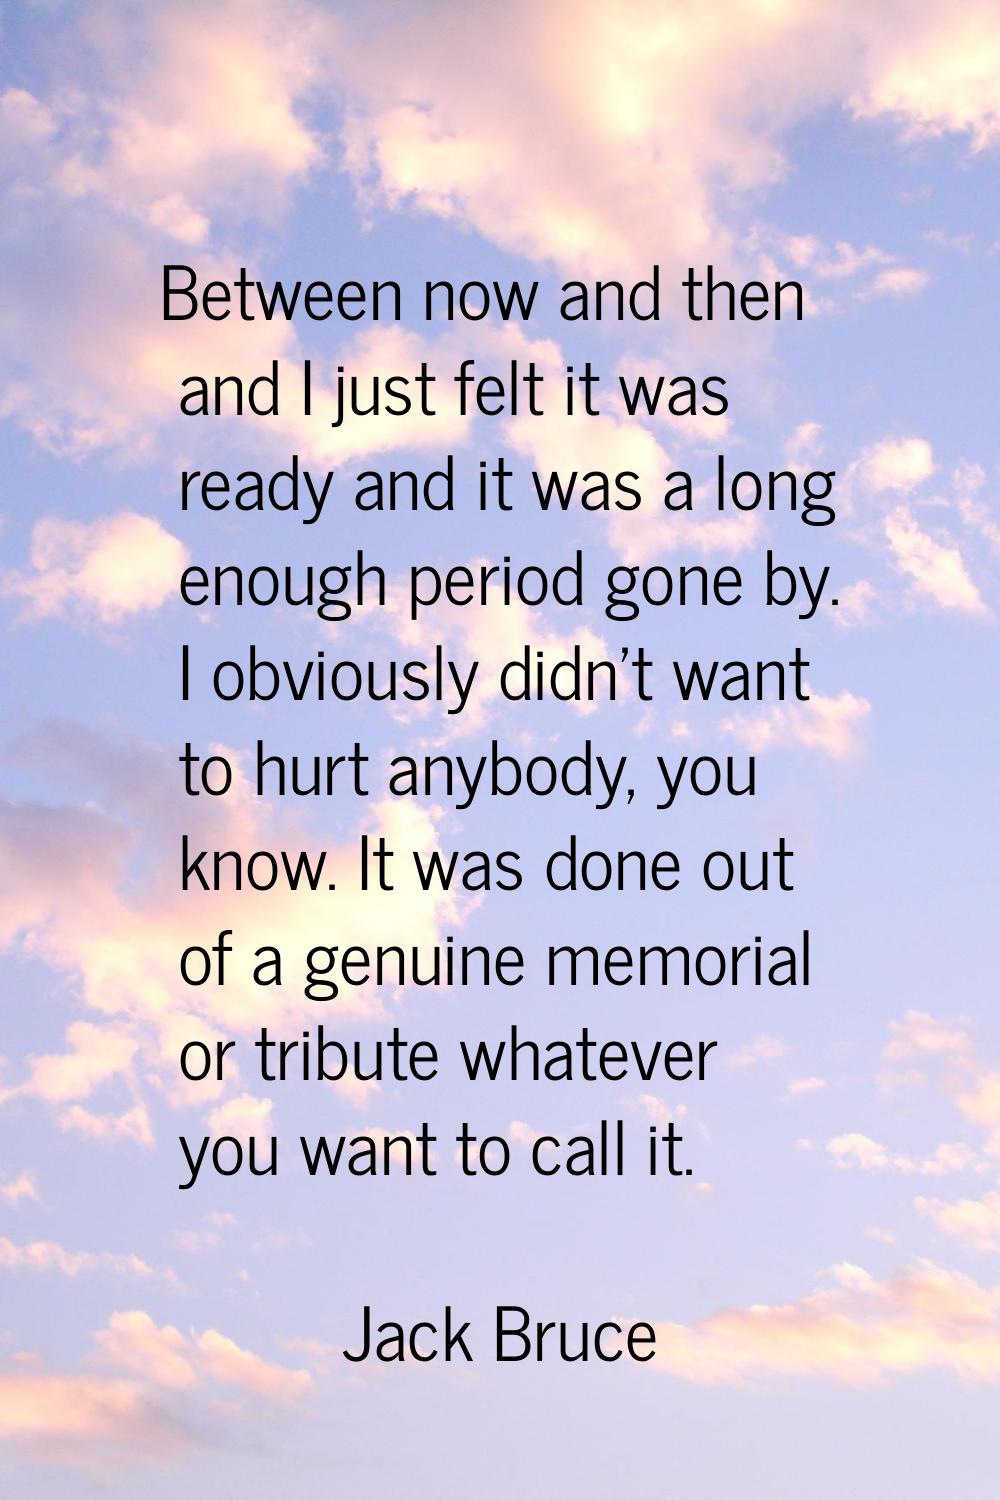 Between now and then and I just felt it was ready and it was a long enough period gone by. I obviou